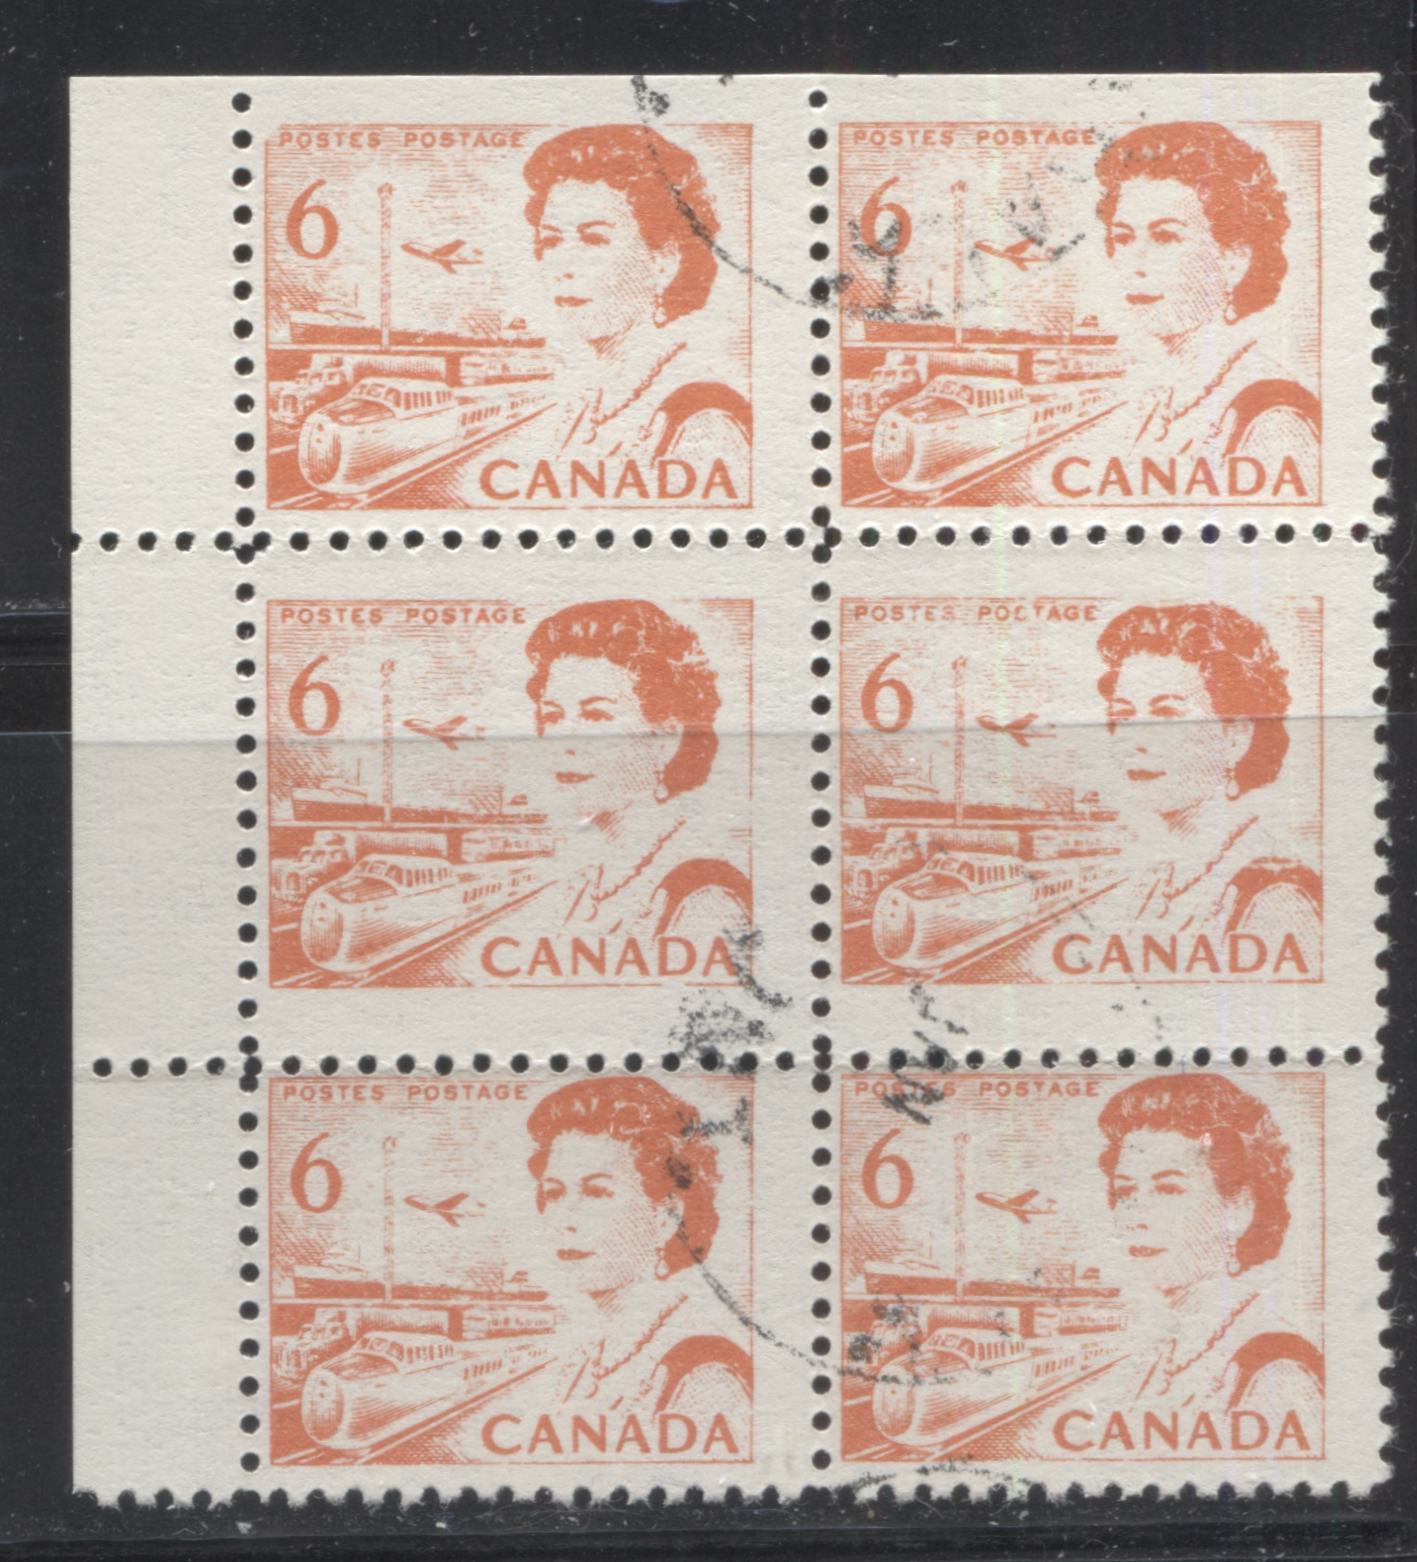 Lot 178 Canada #459bF 6c Orange Transportation, 1967-1973 Centennial Definitive Issue, A Fine "Used" UL Corner Block of 6 of the Lithographed Postal Forgery